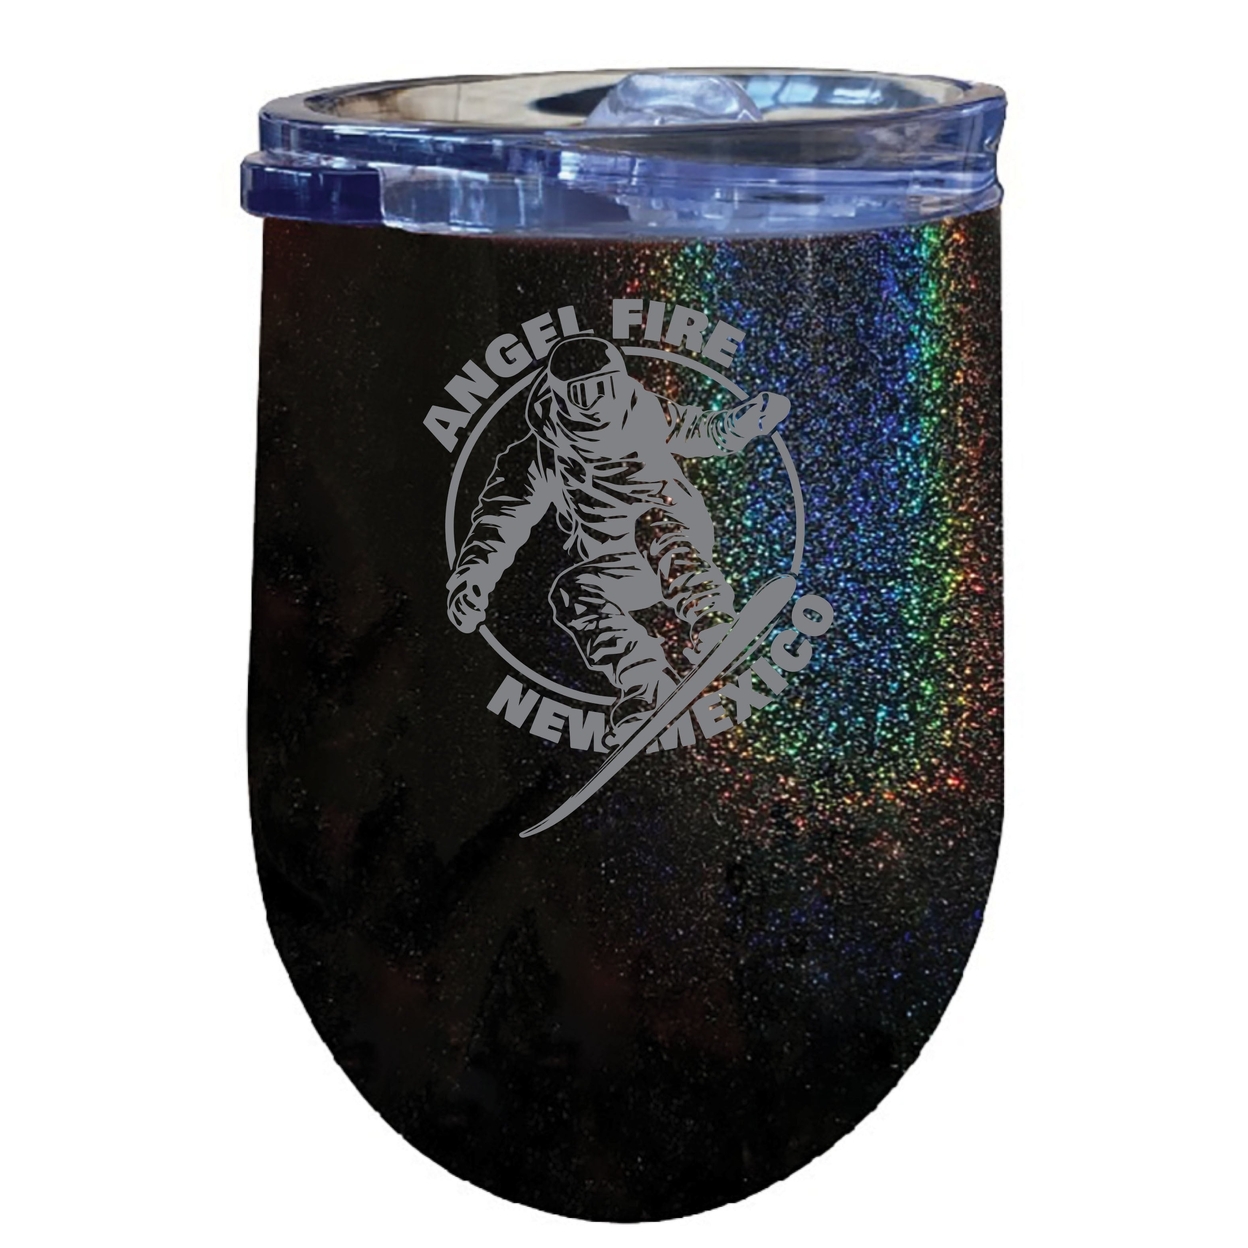 Angel Fire New Mexico Souvenir 12 Oz Engraved Insulated Wine Stainless Steel Tumbler - Rainbow Glitter Gray,,4-Pack